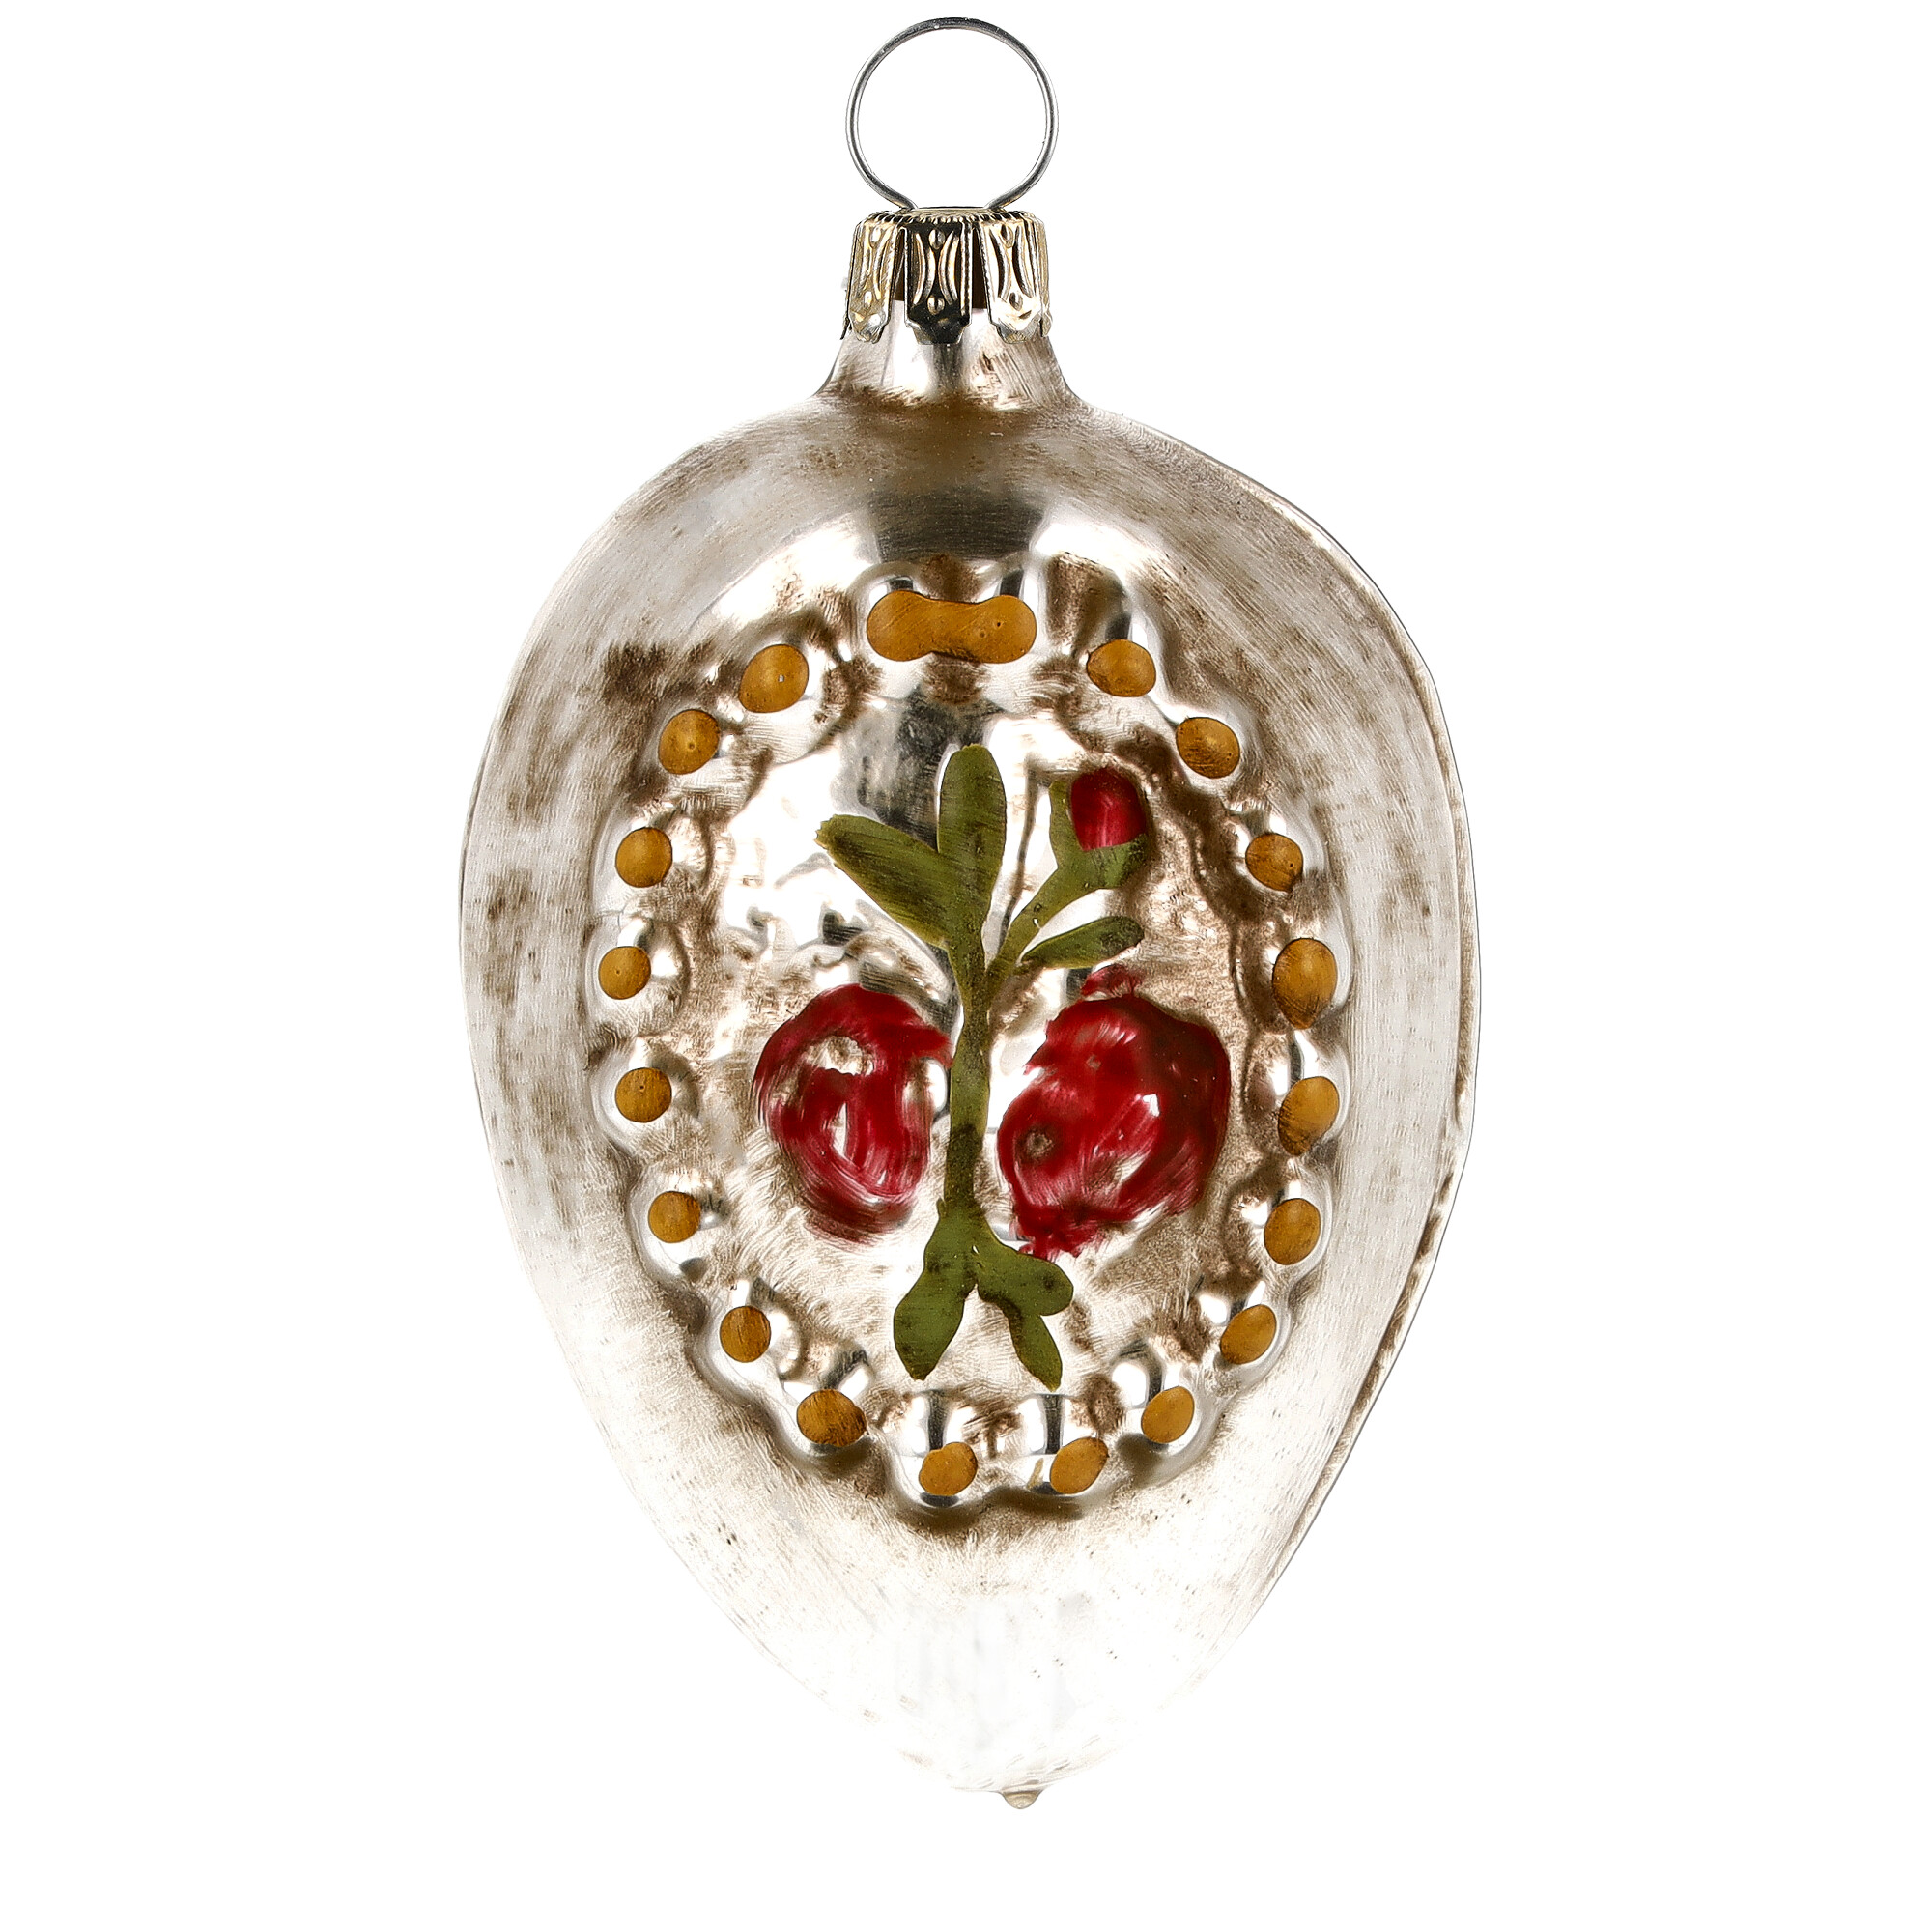 Retro Vintage style Christmas Glass Ornament - Cross and roses